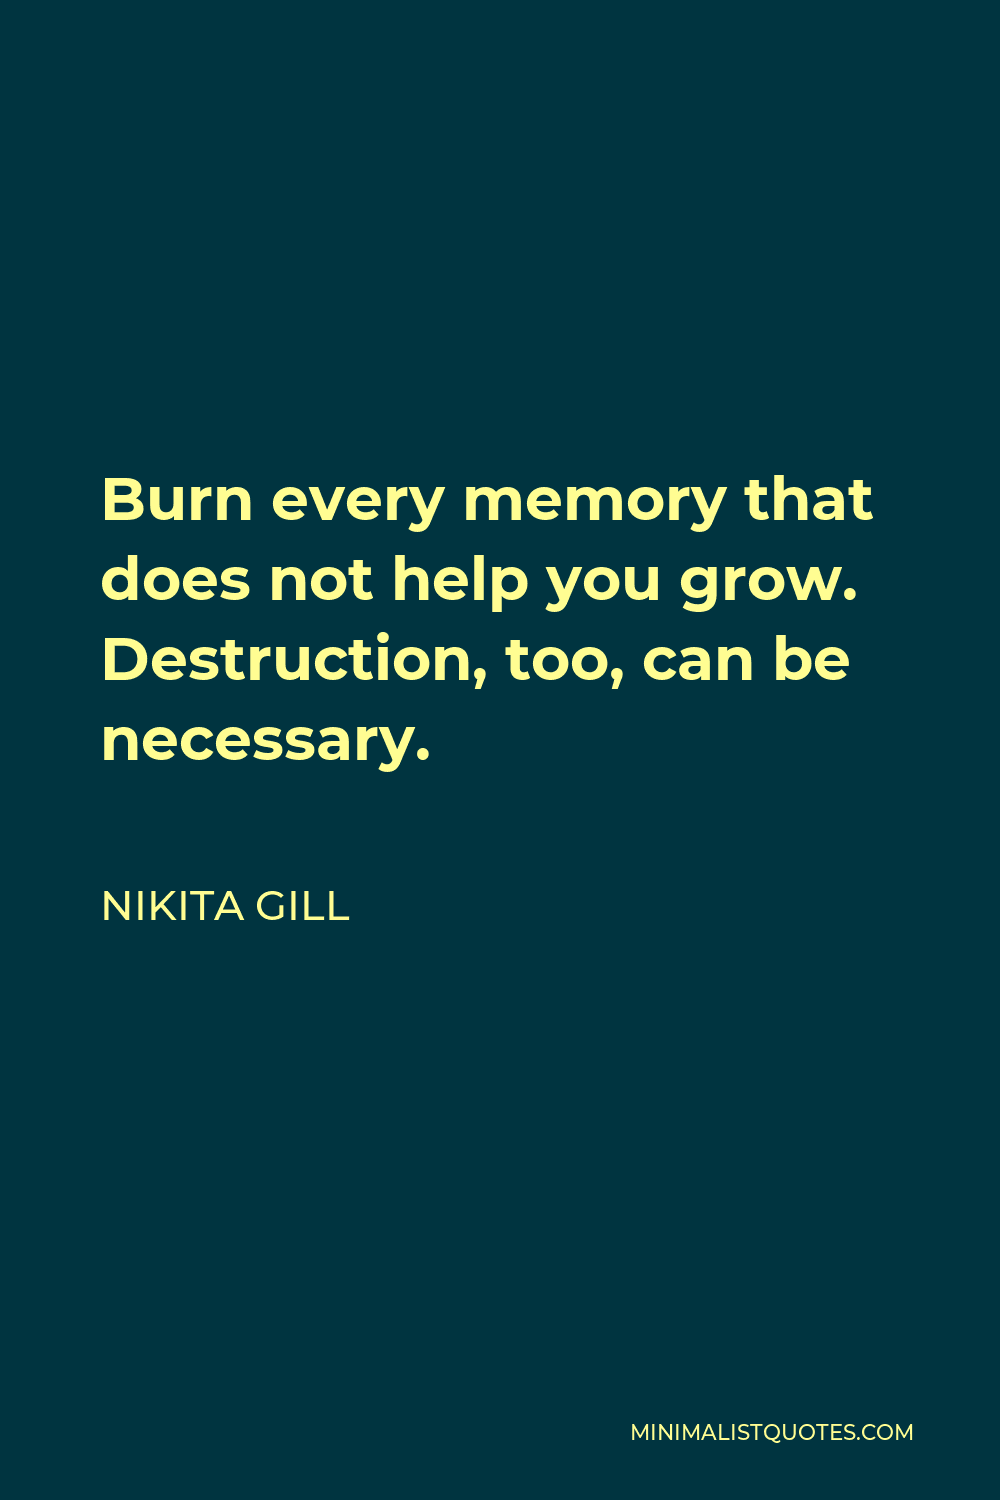 Nikita Gill Quote - Burn every memory that does not help you grow. Destruction, too, can be necessary.